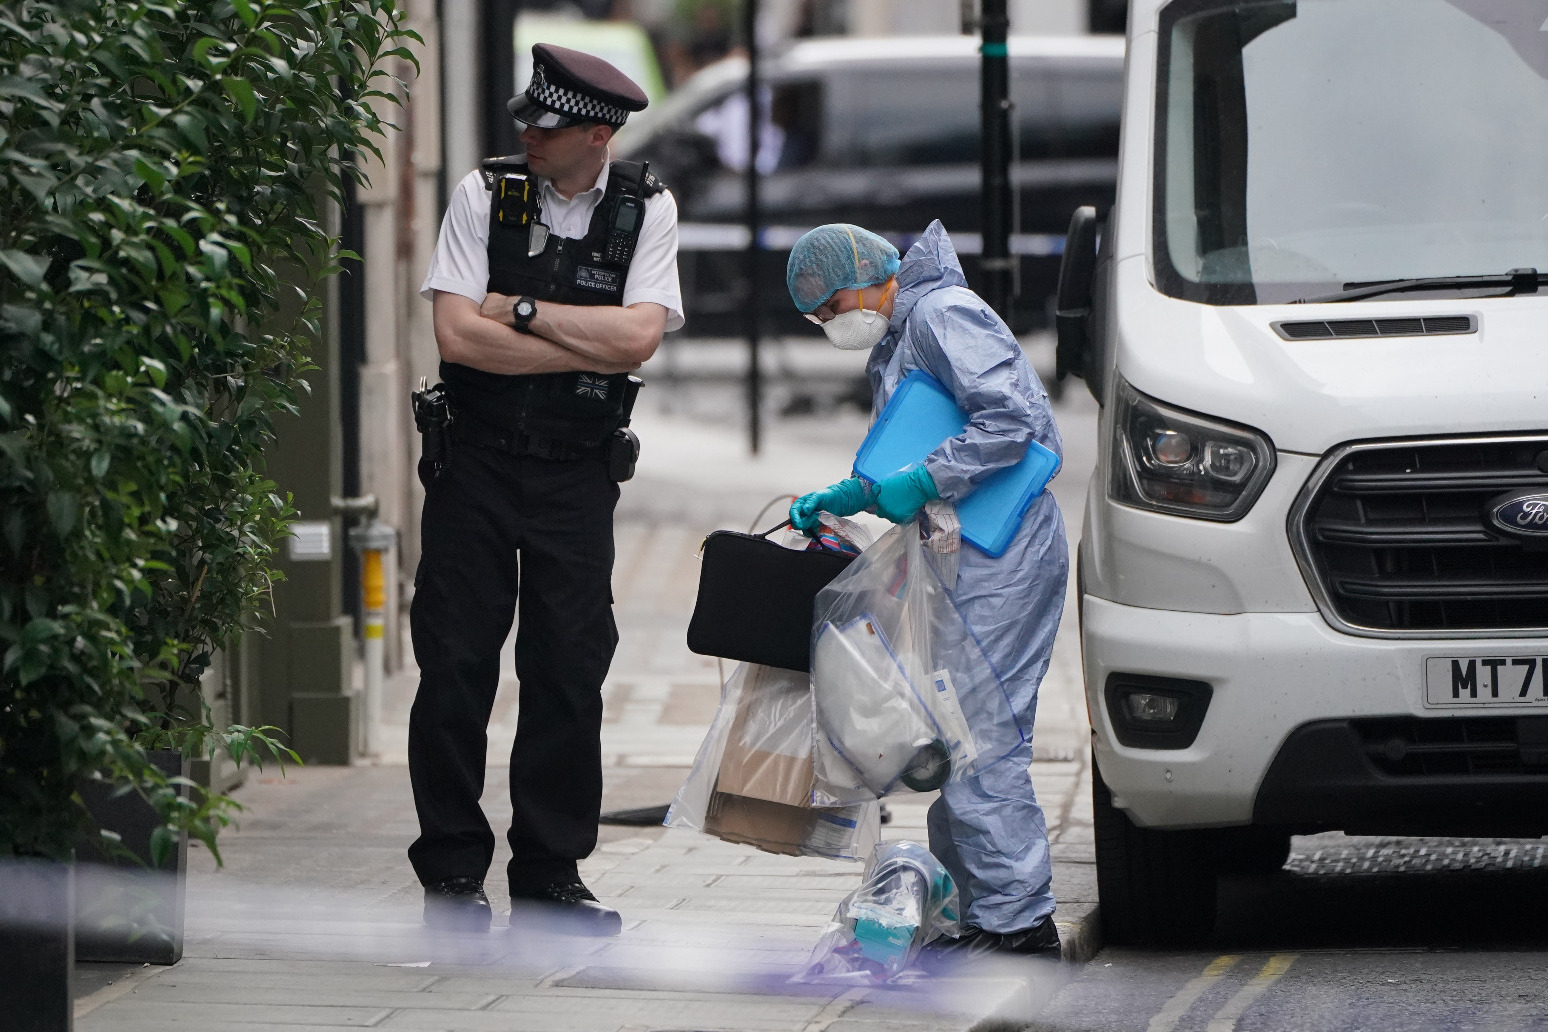 Man stabbed to death near Londons Oxford Street